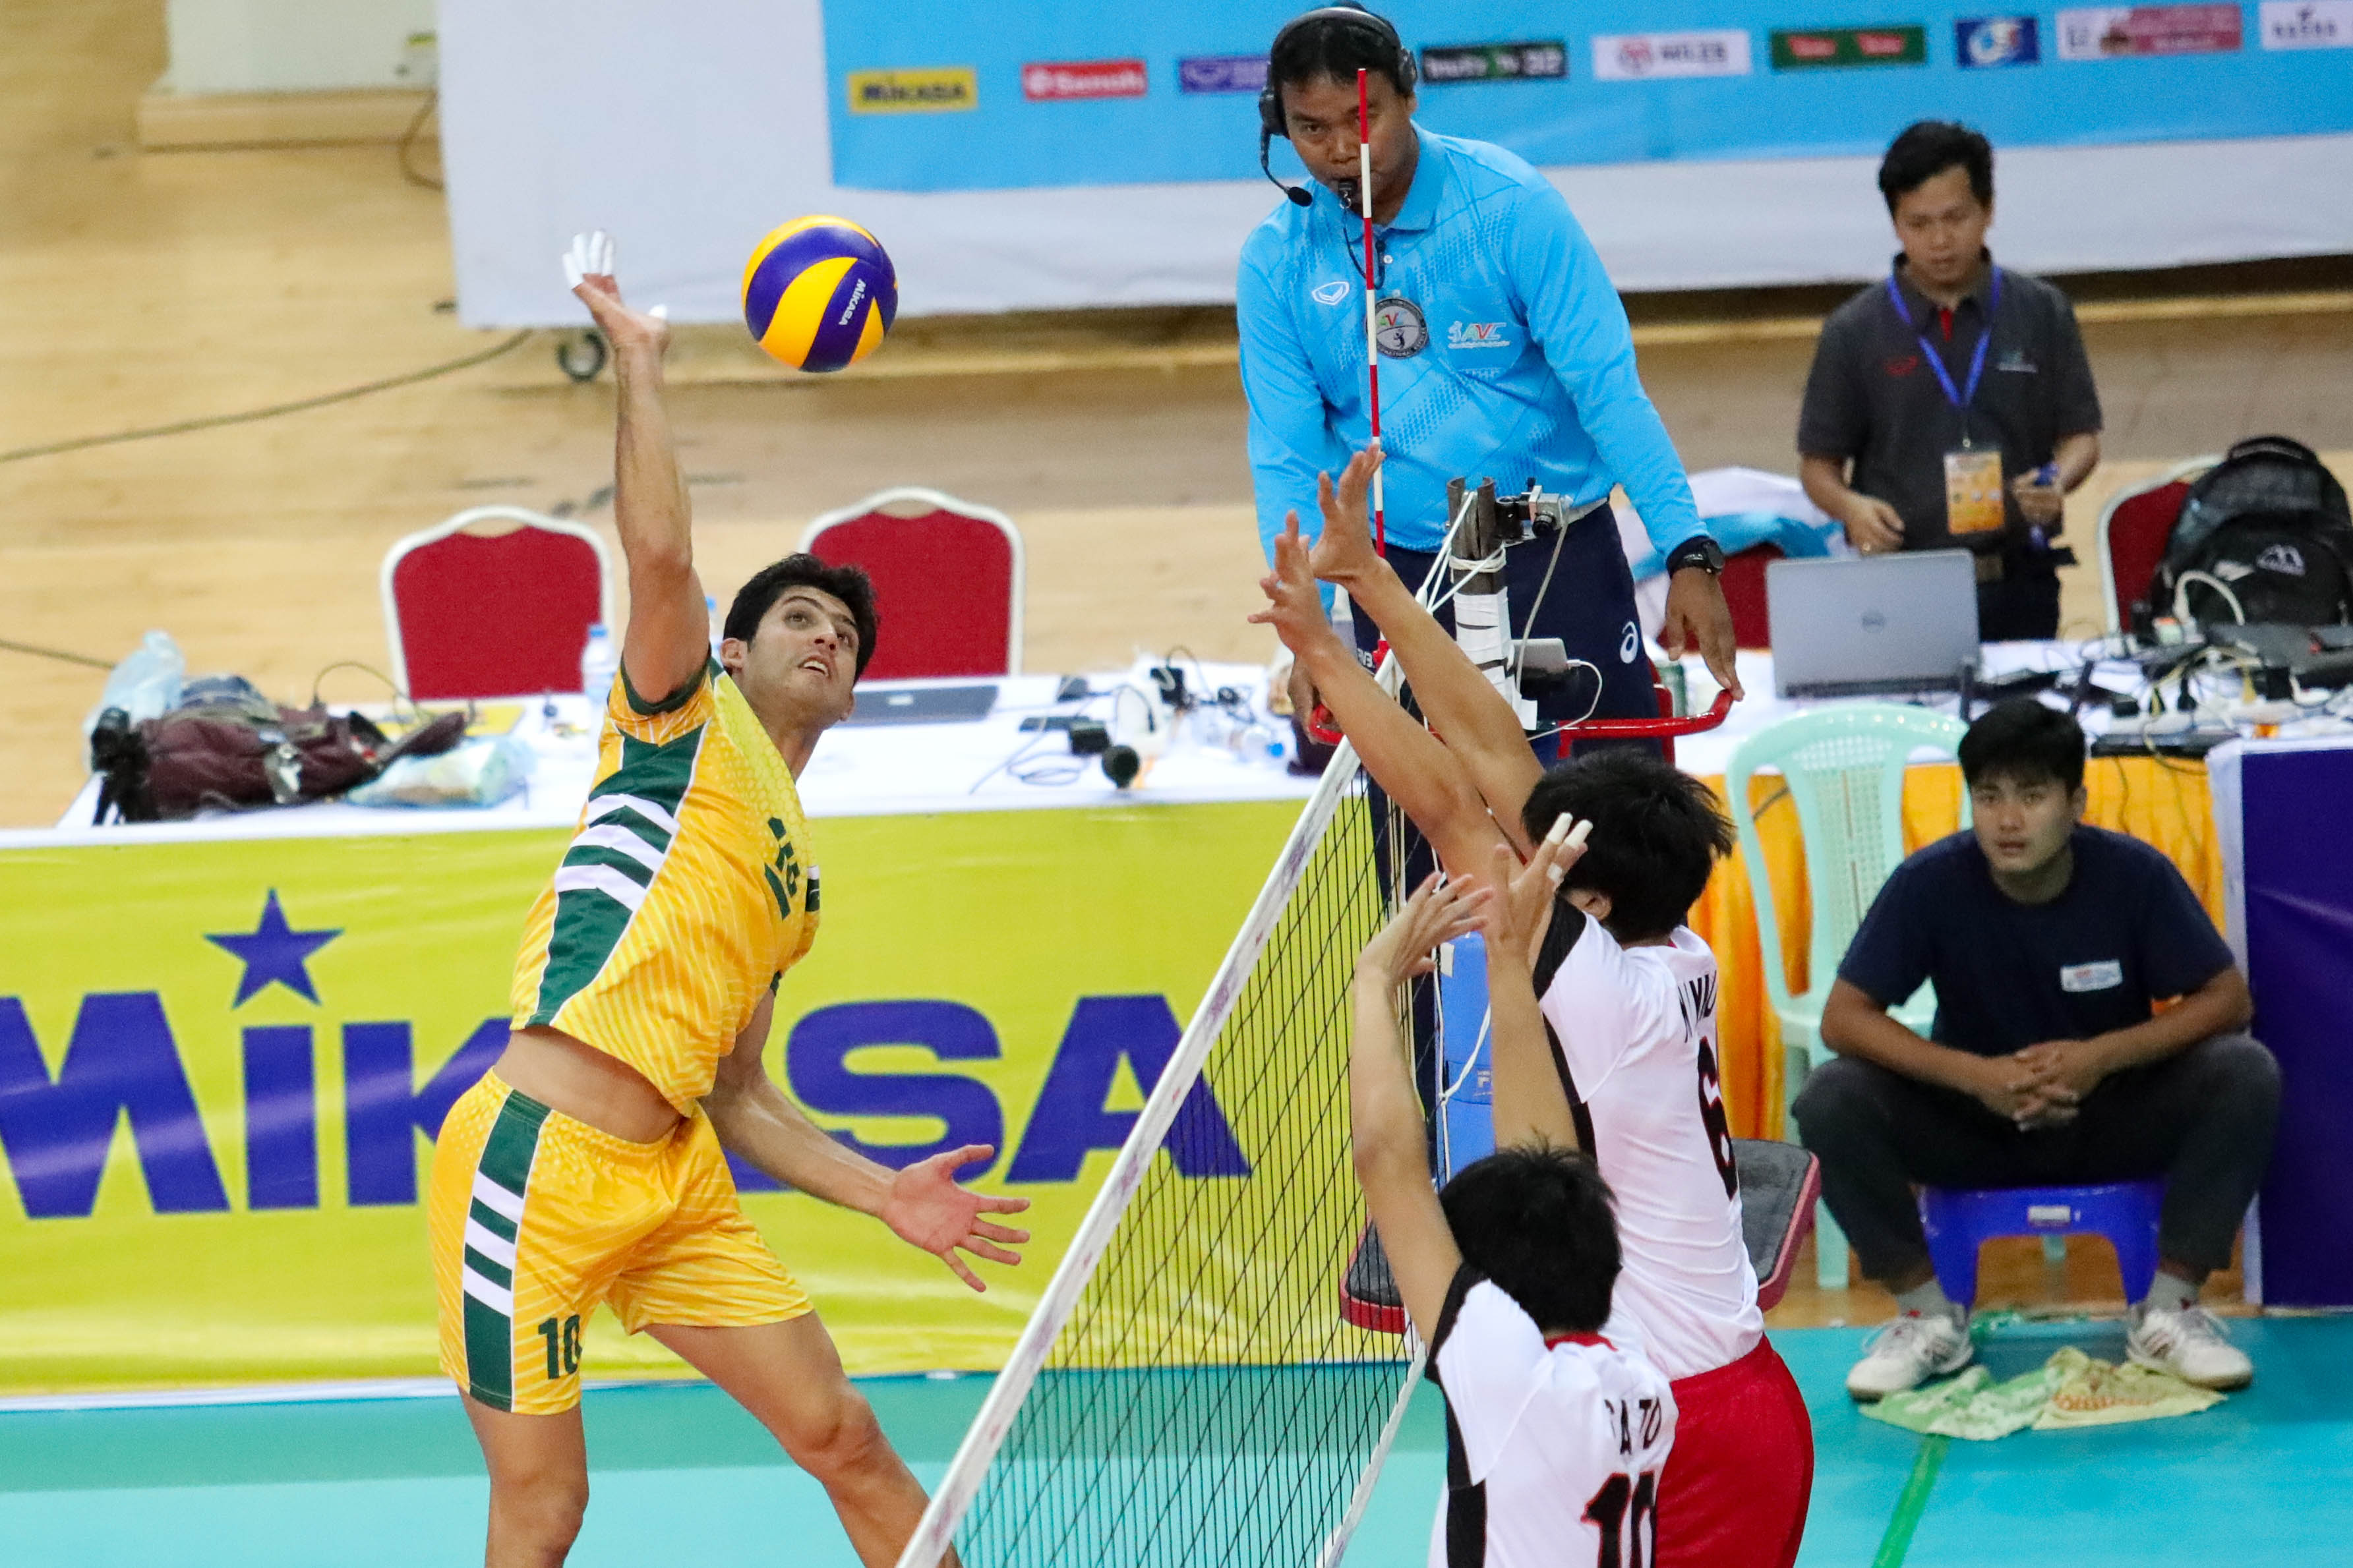 JAPAN CRUISE TO 3-0 VICTORY OVER PAKISTAN TO TAKE BRONZE AT ASIAN MEN’S U23 CHAMPIONSHIP